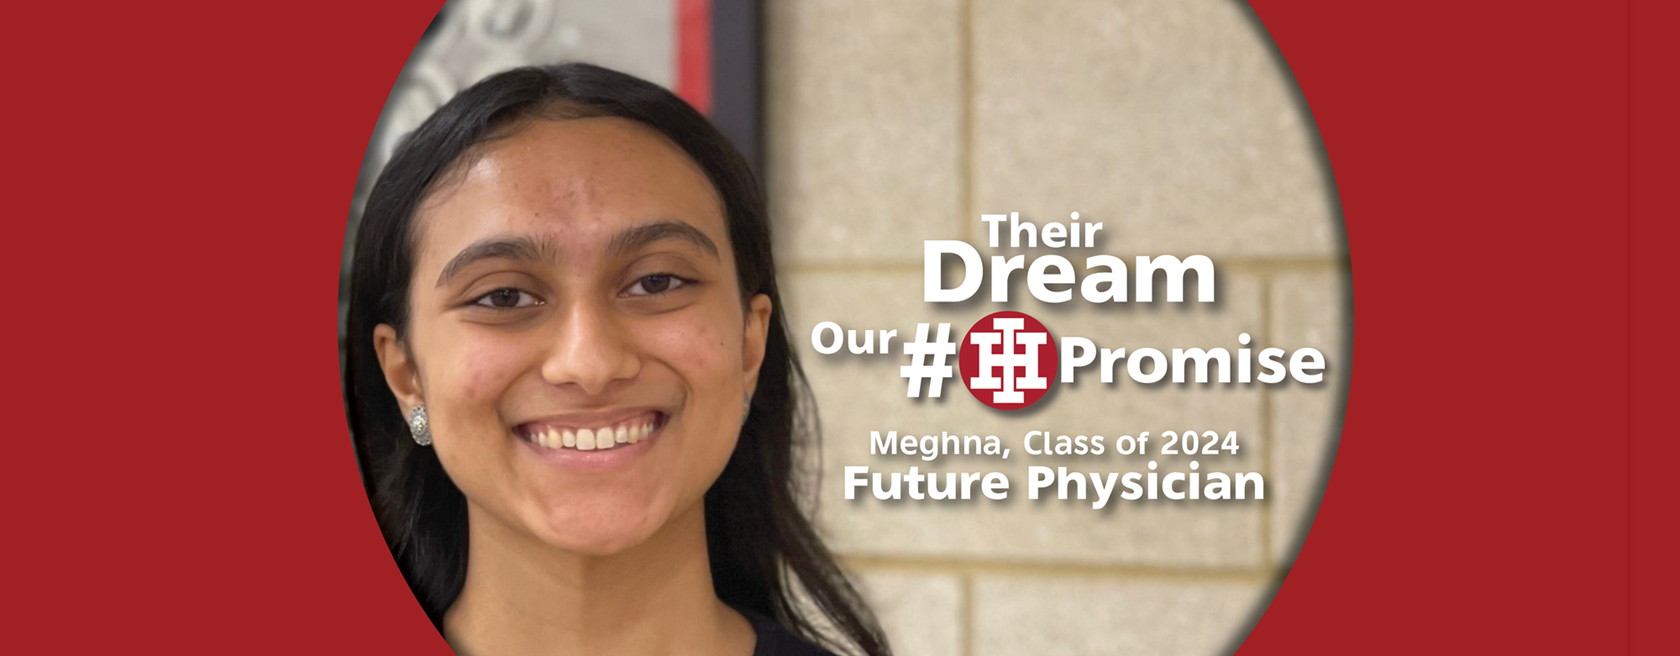 Their Dream Our Promise - Meghna, Class of 2024, Future Physician